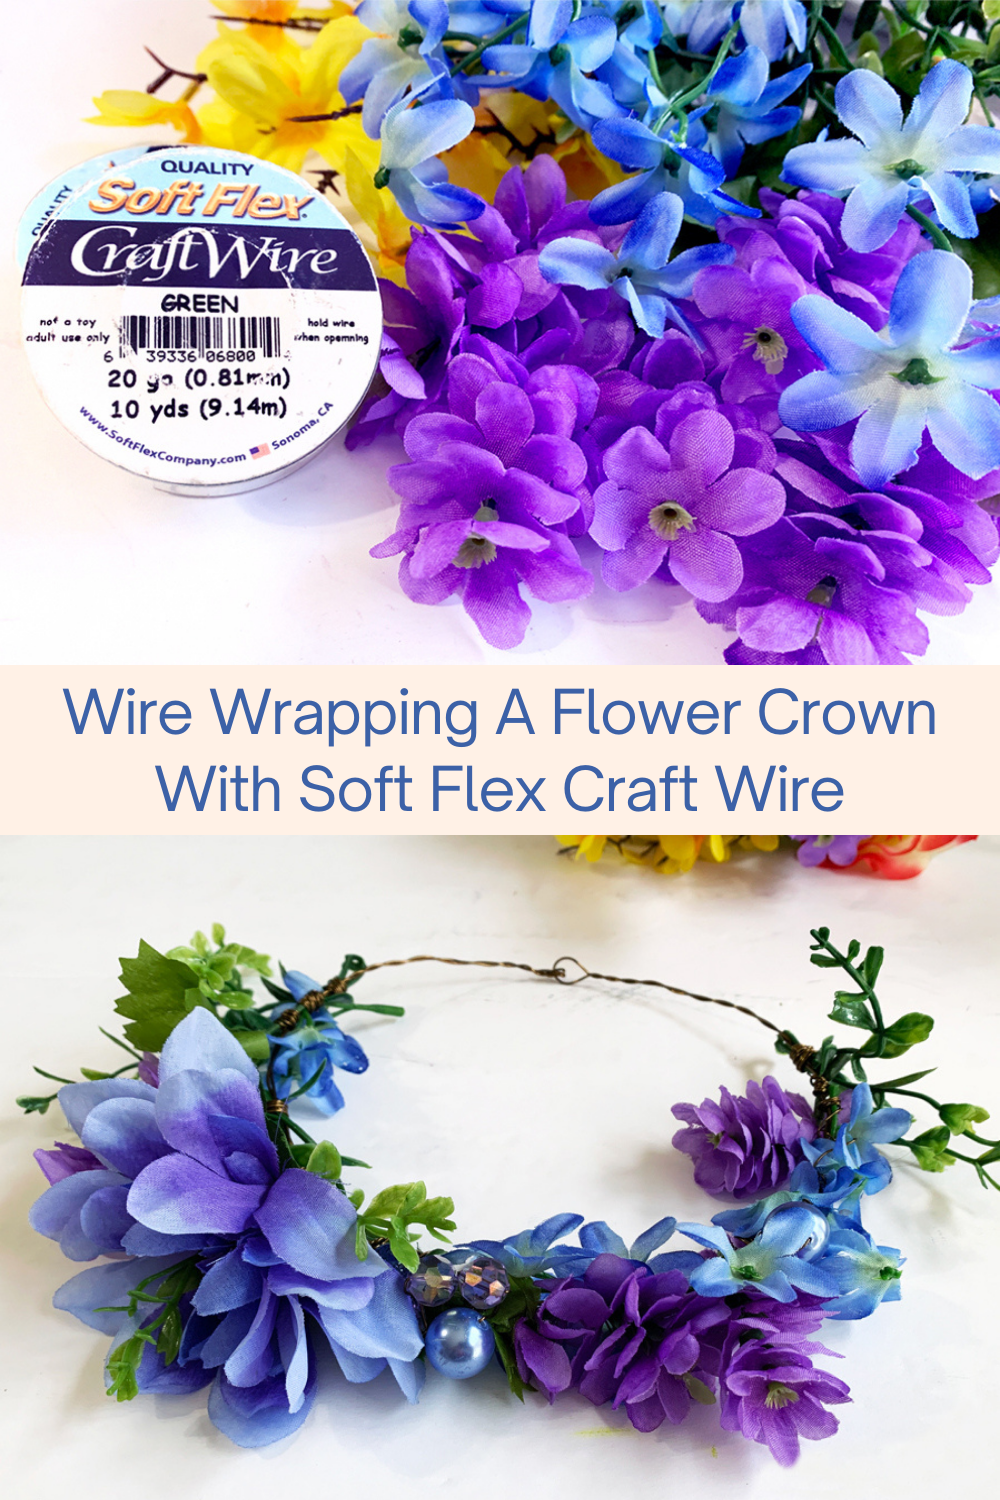 Wire Wrapping A Flower Crown With Soft Flex Craft Wire Collage